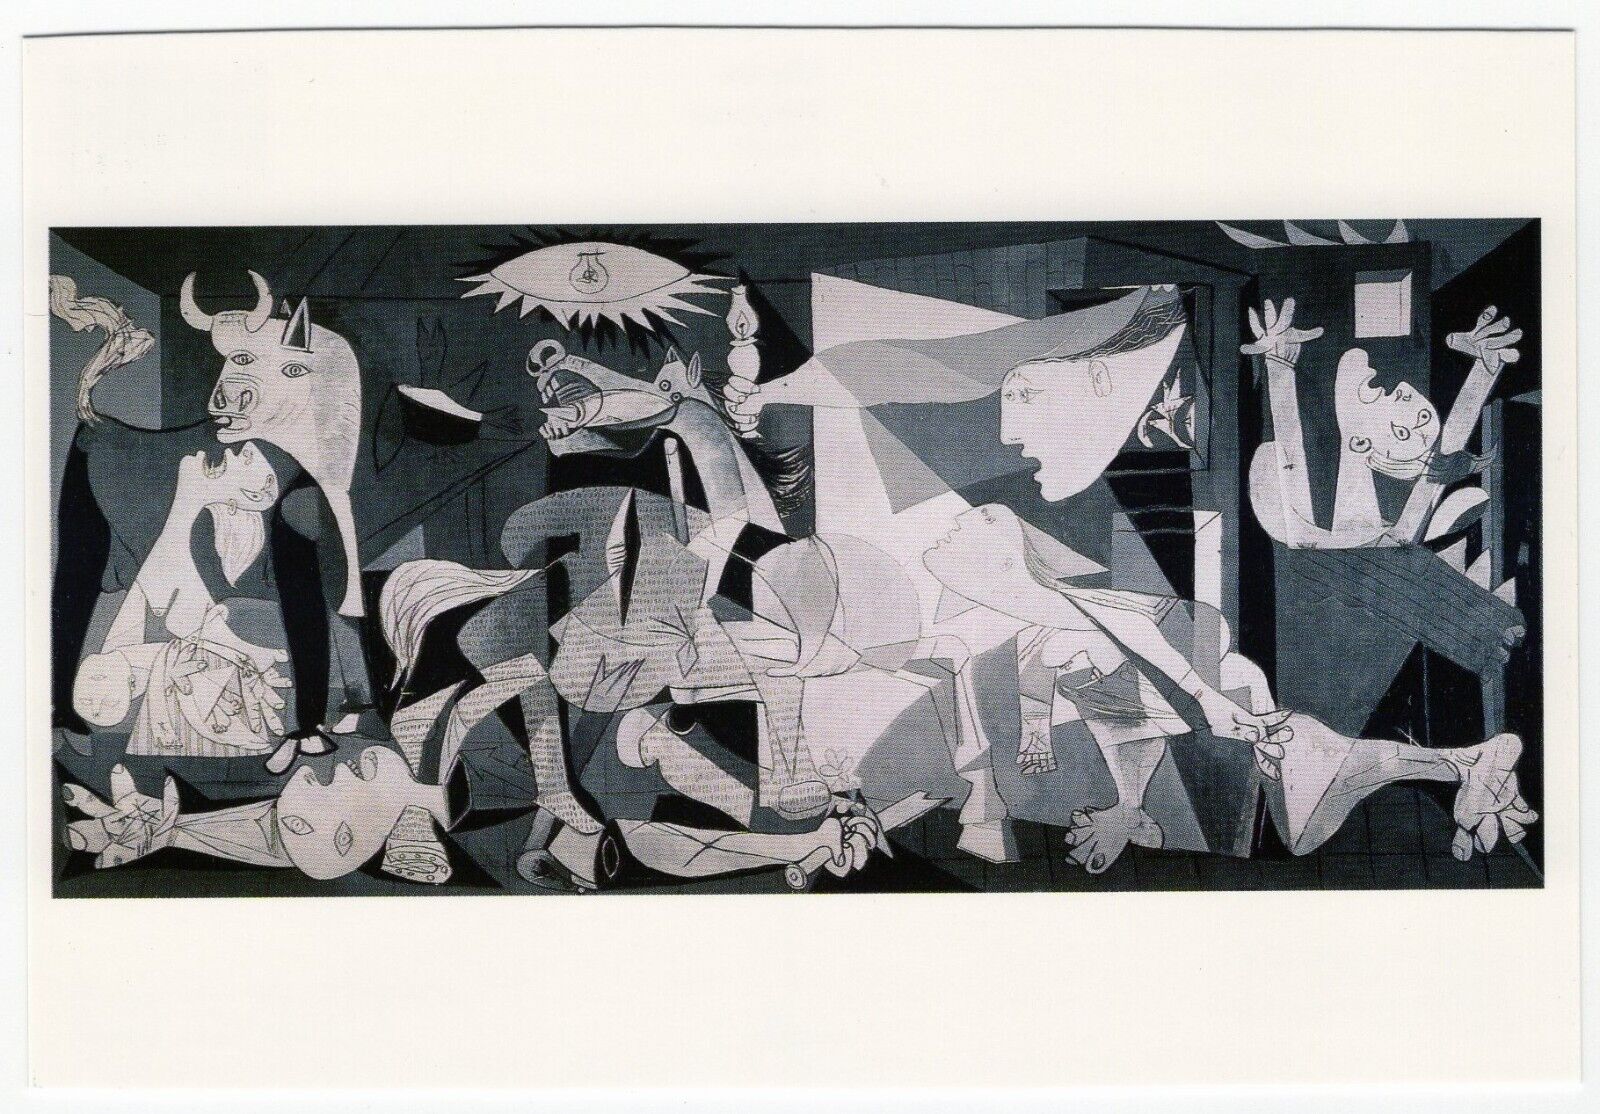 Art Museum Postcard: Guernica by Pablo Picasso, Museo Reina Sofía, Madrid, Spain